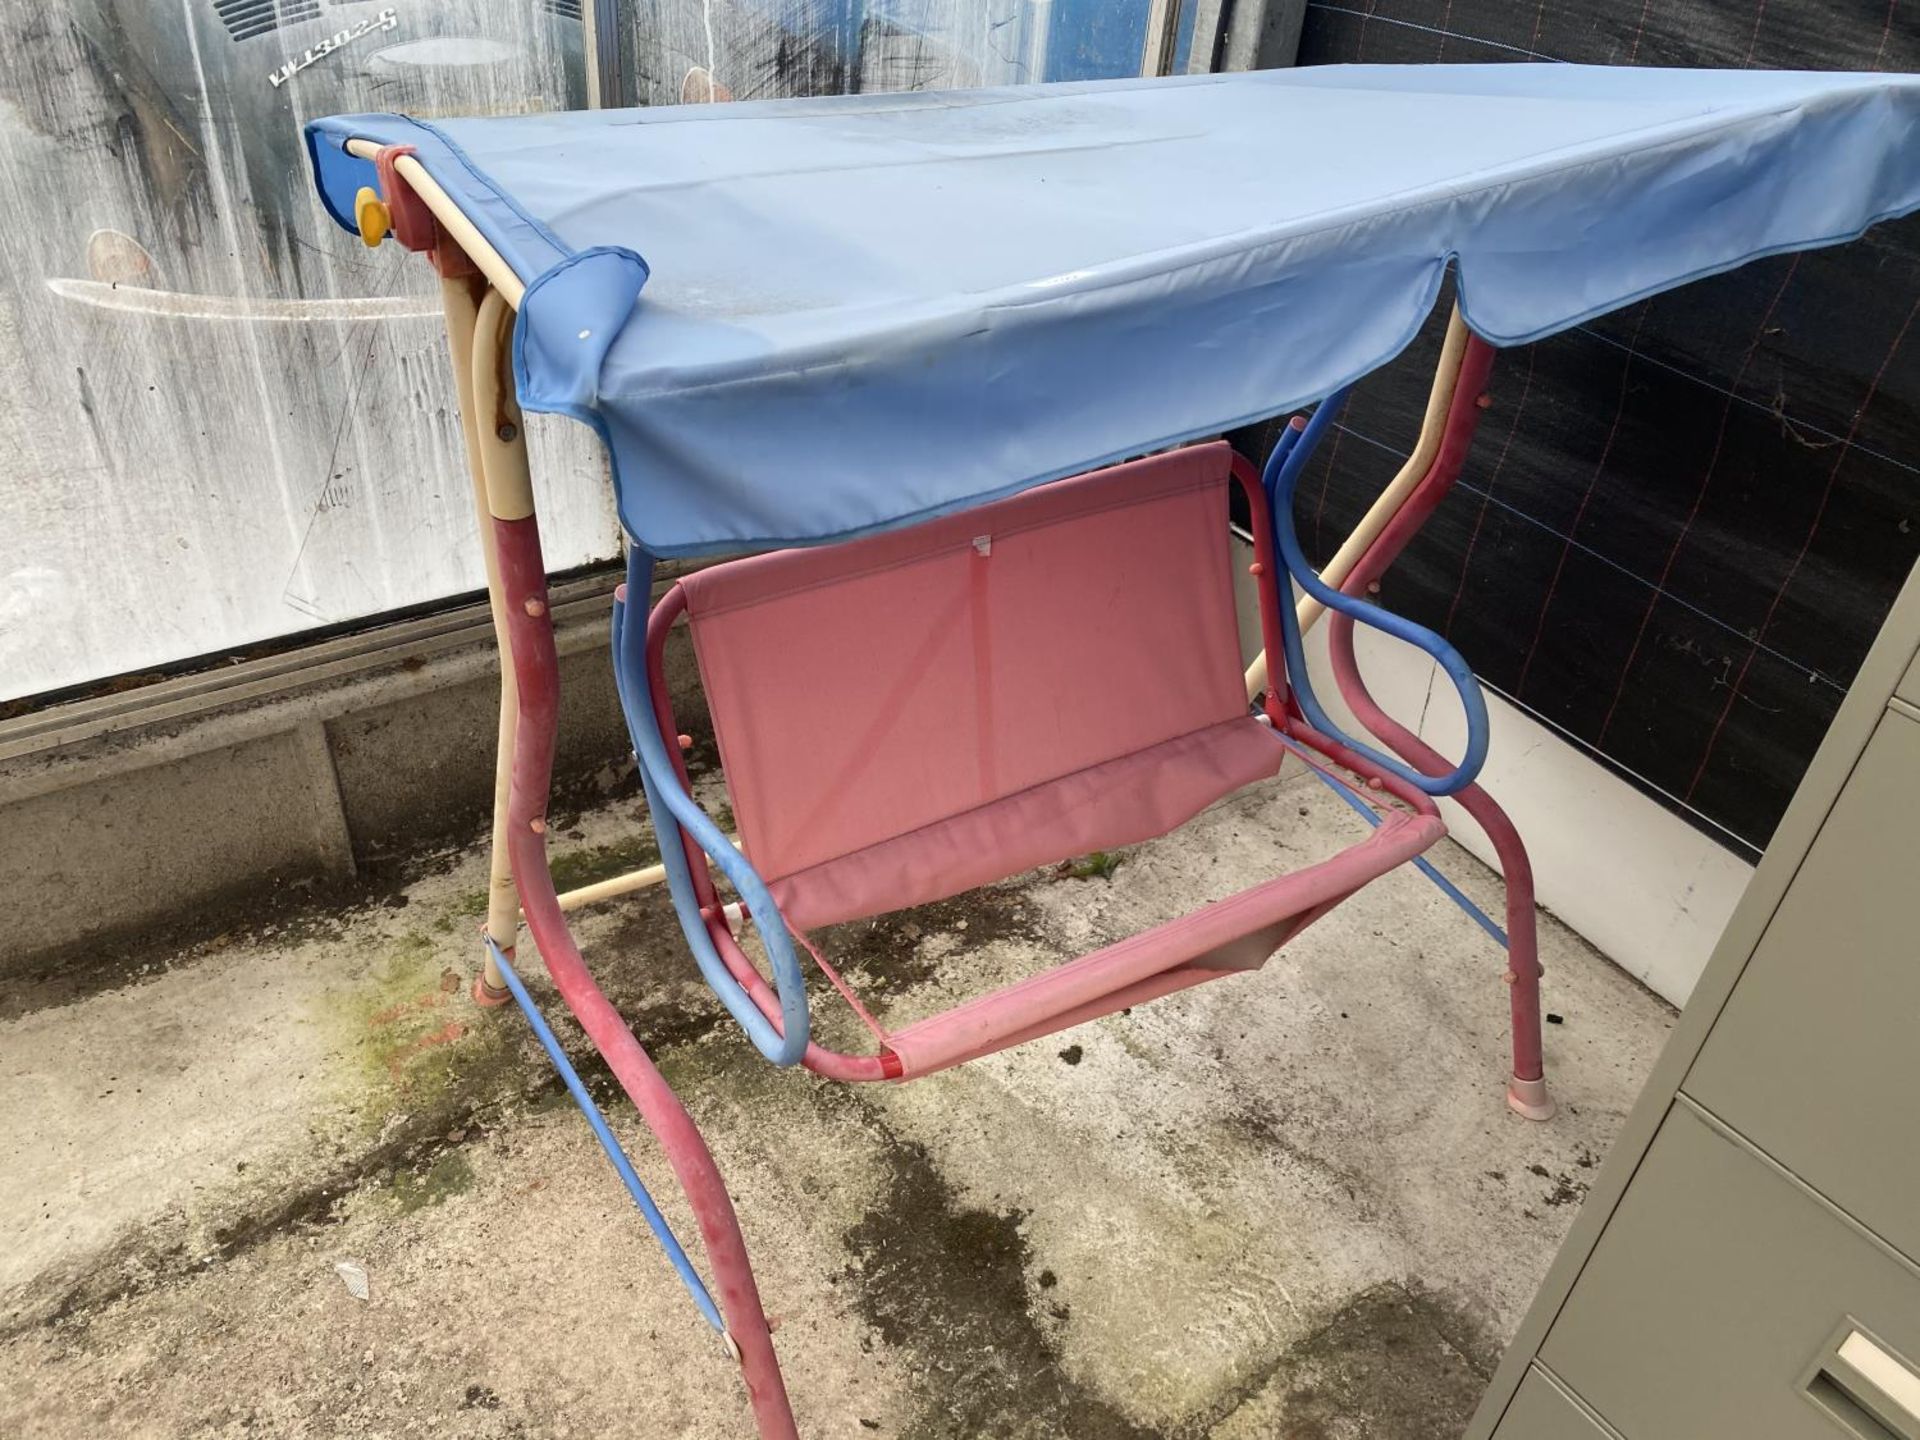 A CHILD'S SWING SEAT (REQUIRES REPAIR TO SEAT)